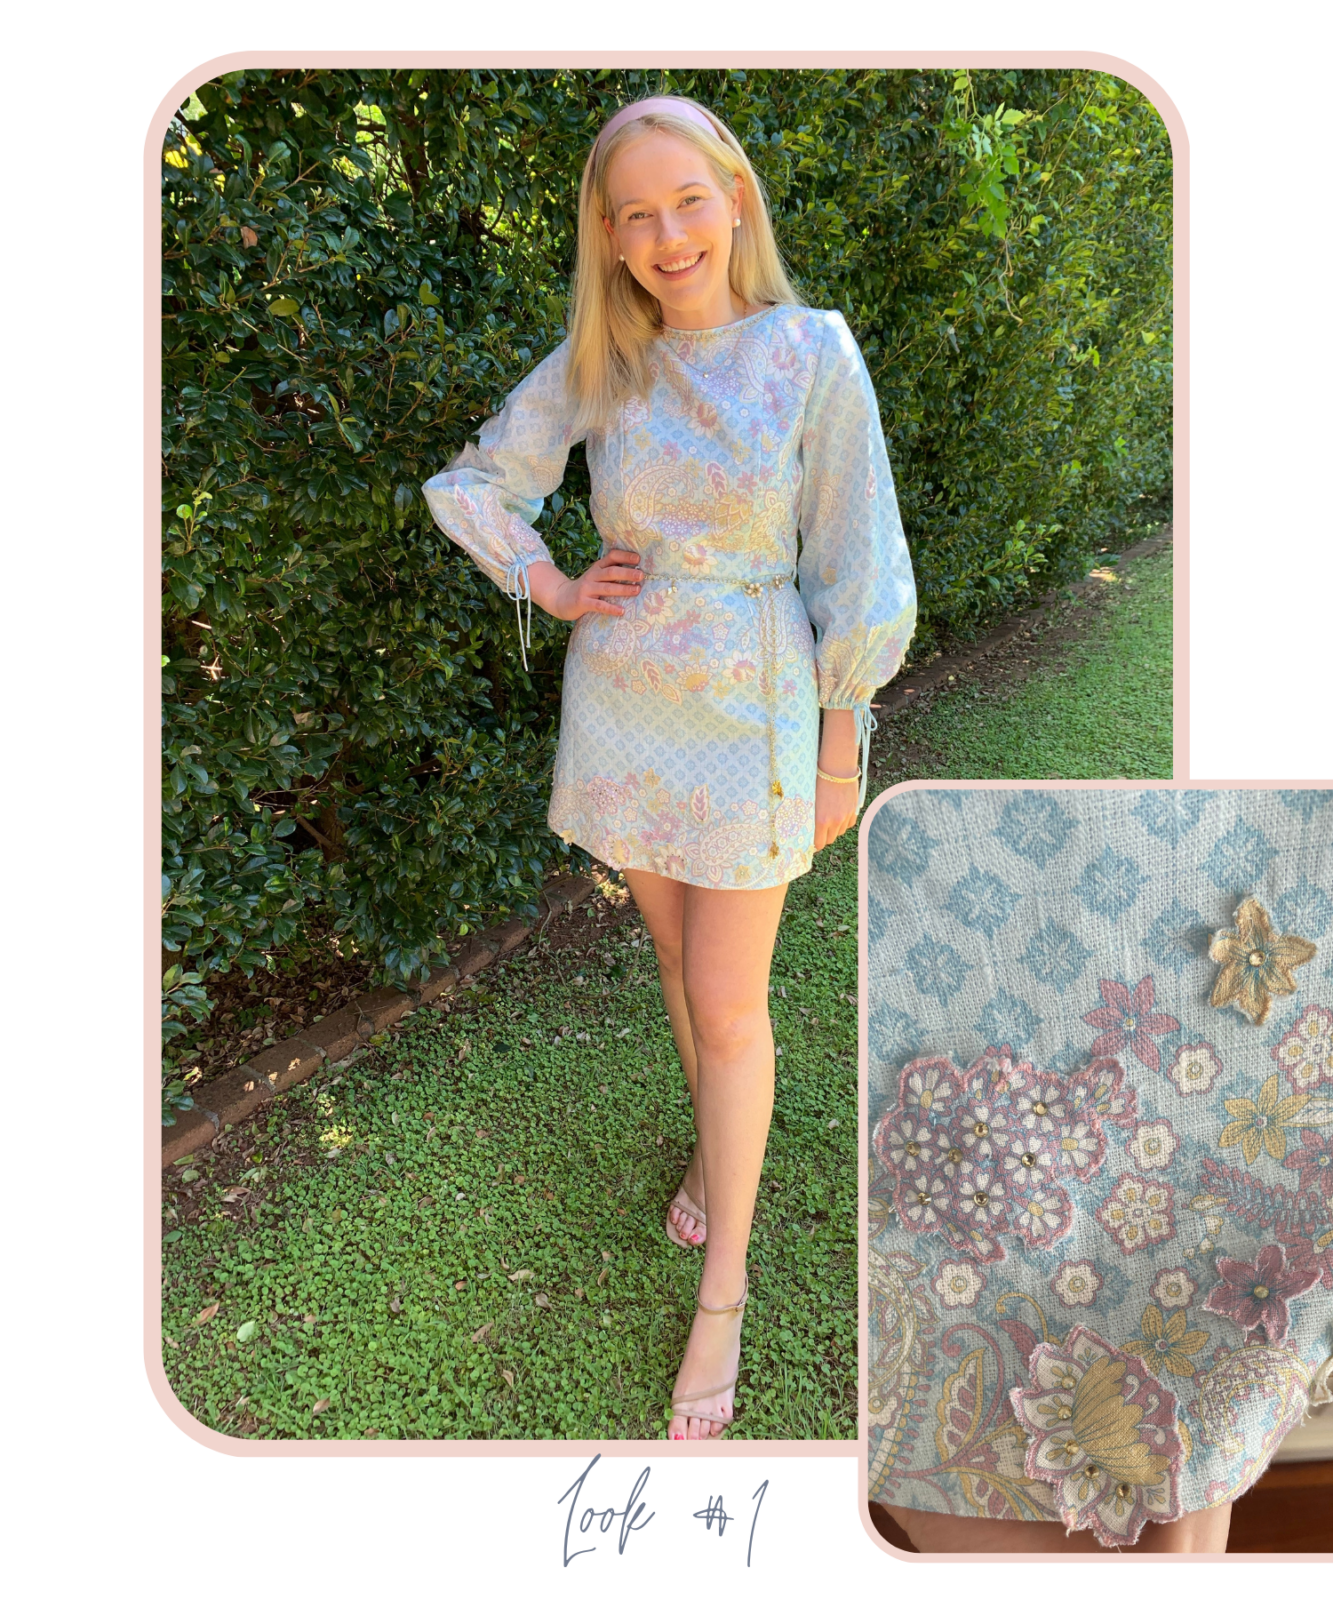 Model poses in leafy green garden wearing a blue coloured mini, paisley printed dress. The dress is enhanced with 3D embroidered appliqué featuring Swarovski crystal details.
A gold chain with pearl and crystal charm belt completes the look. 